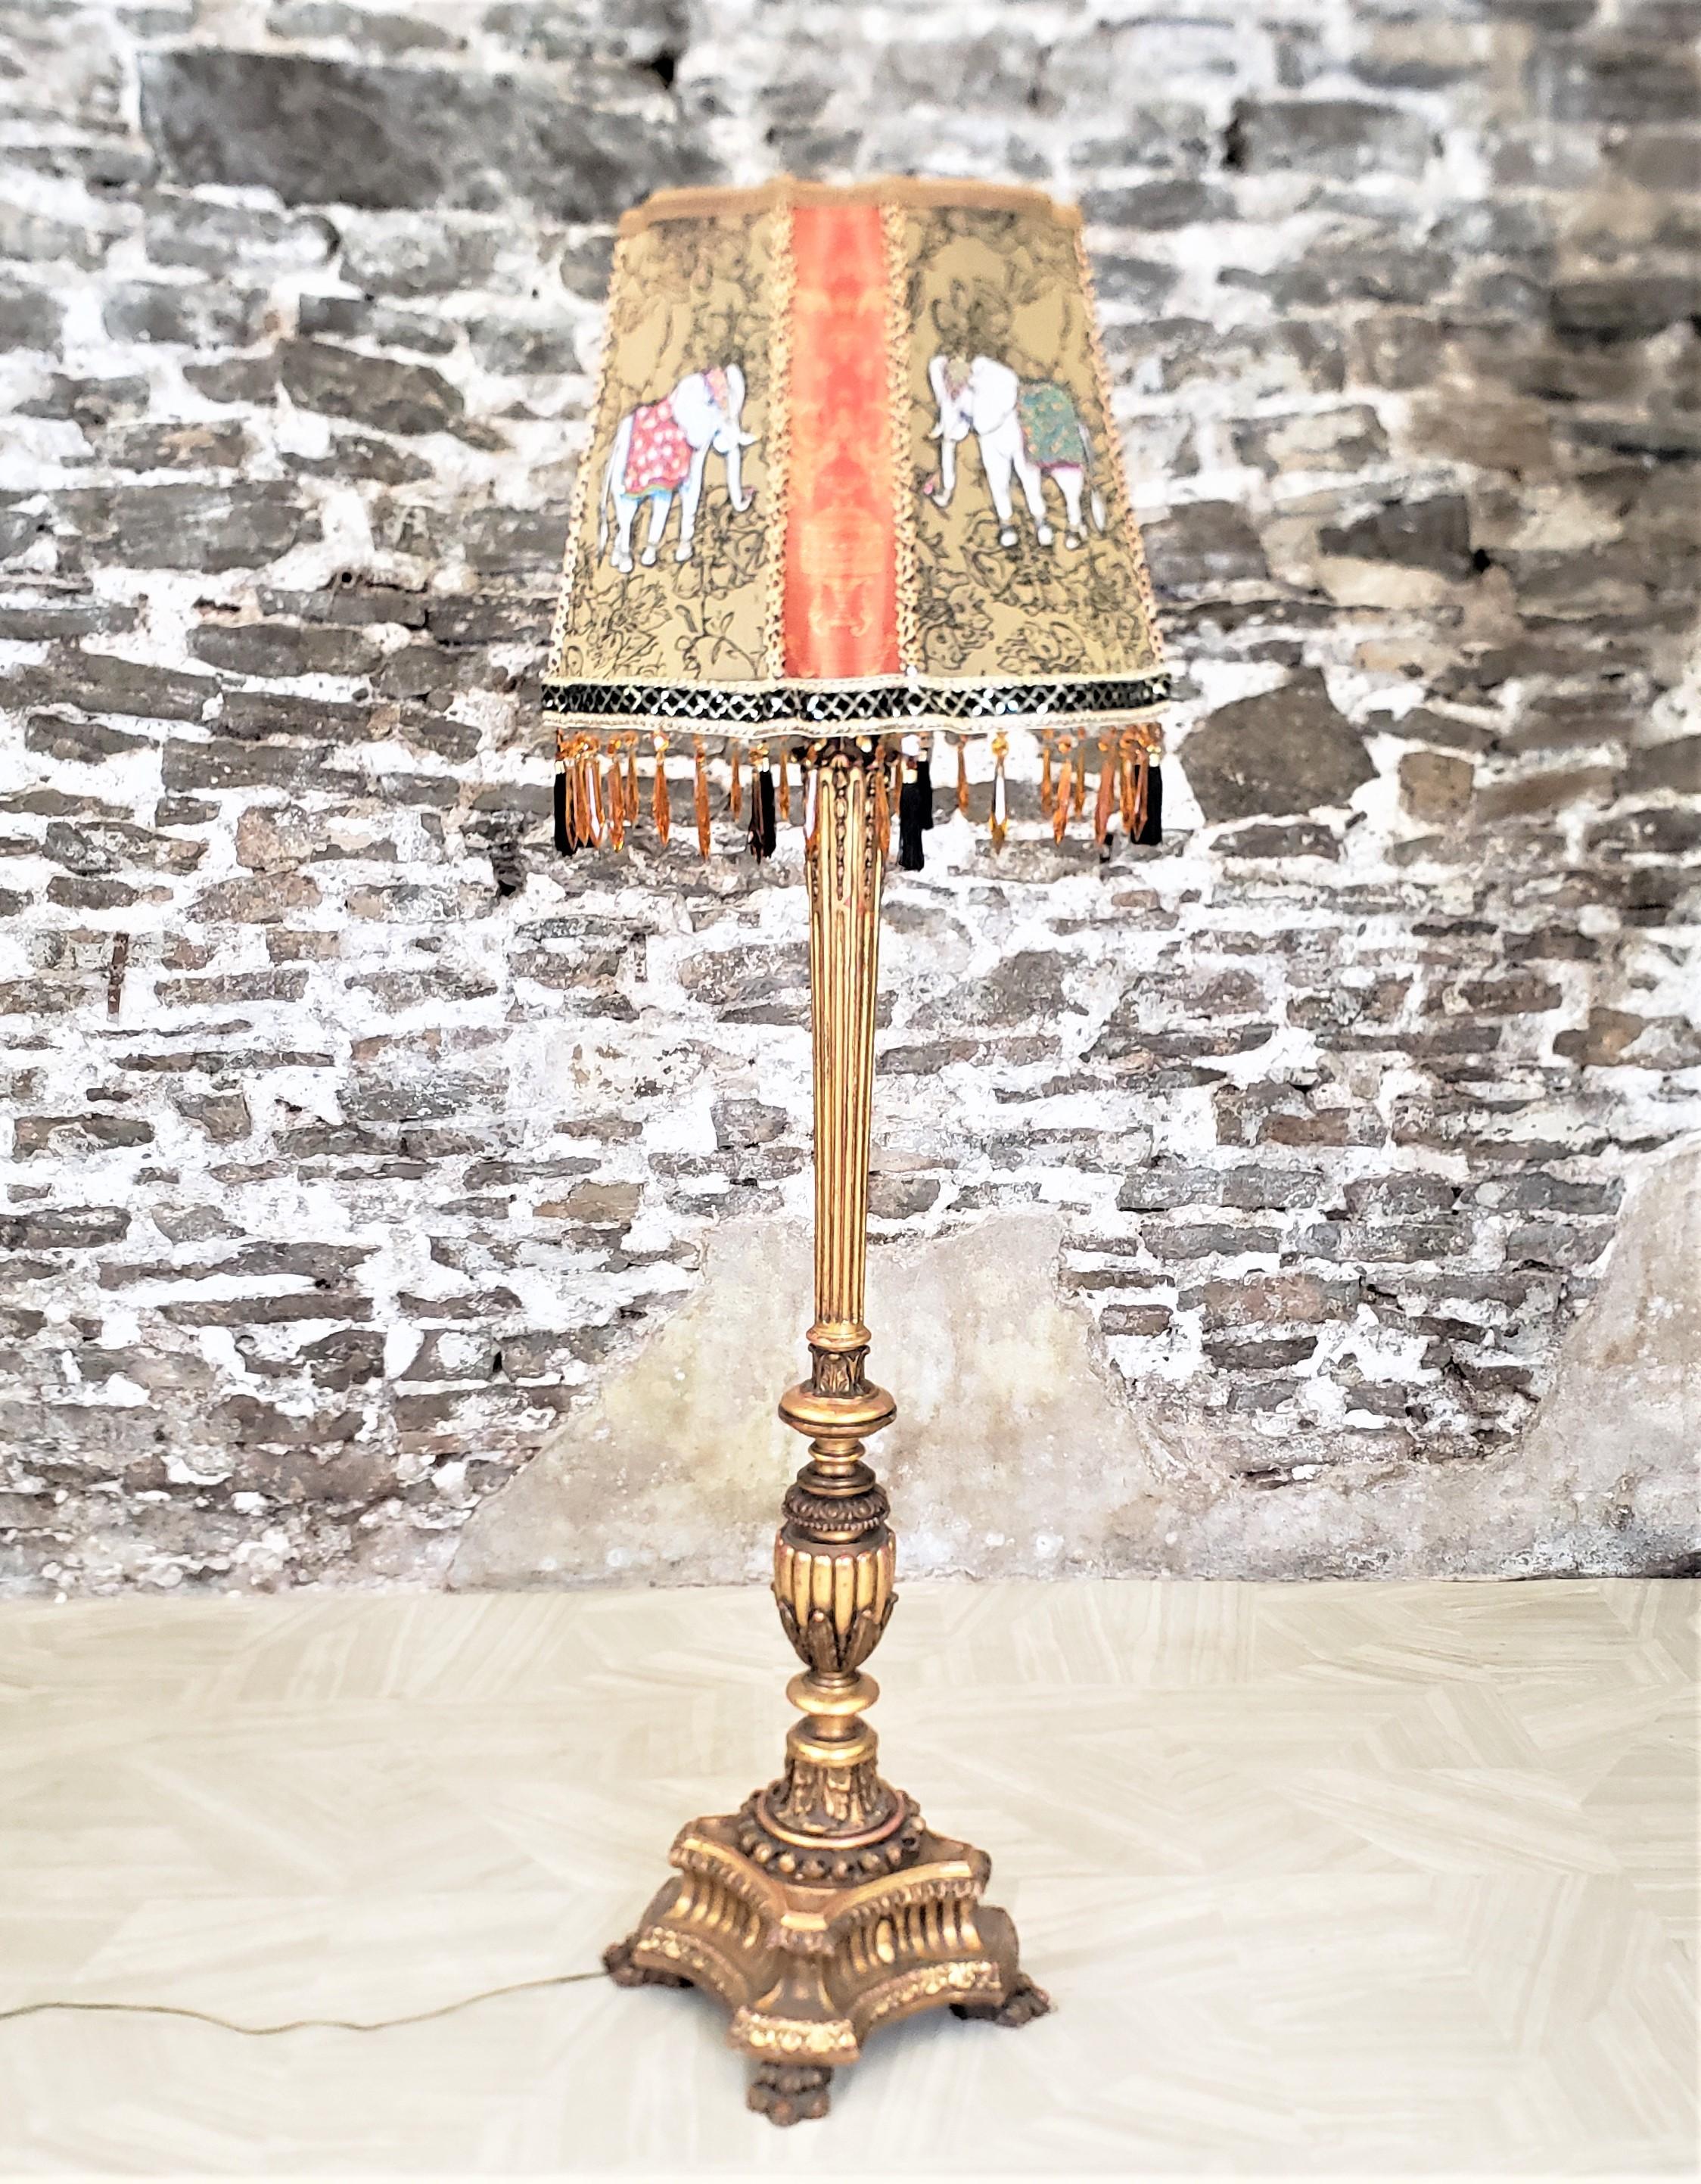 Antique Italian Florentine Hand-Carved & Gilt Finished Floor Lamp & Shade In Good Condition For Sale In Hamilton, Ontario